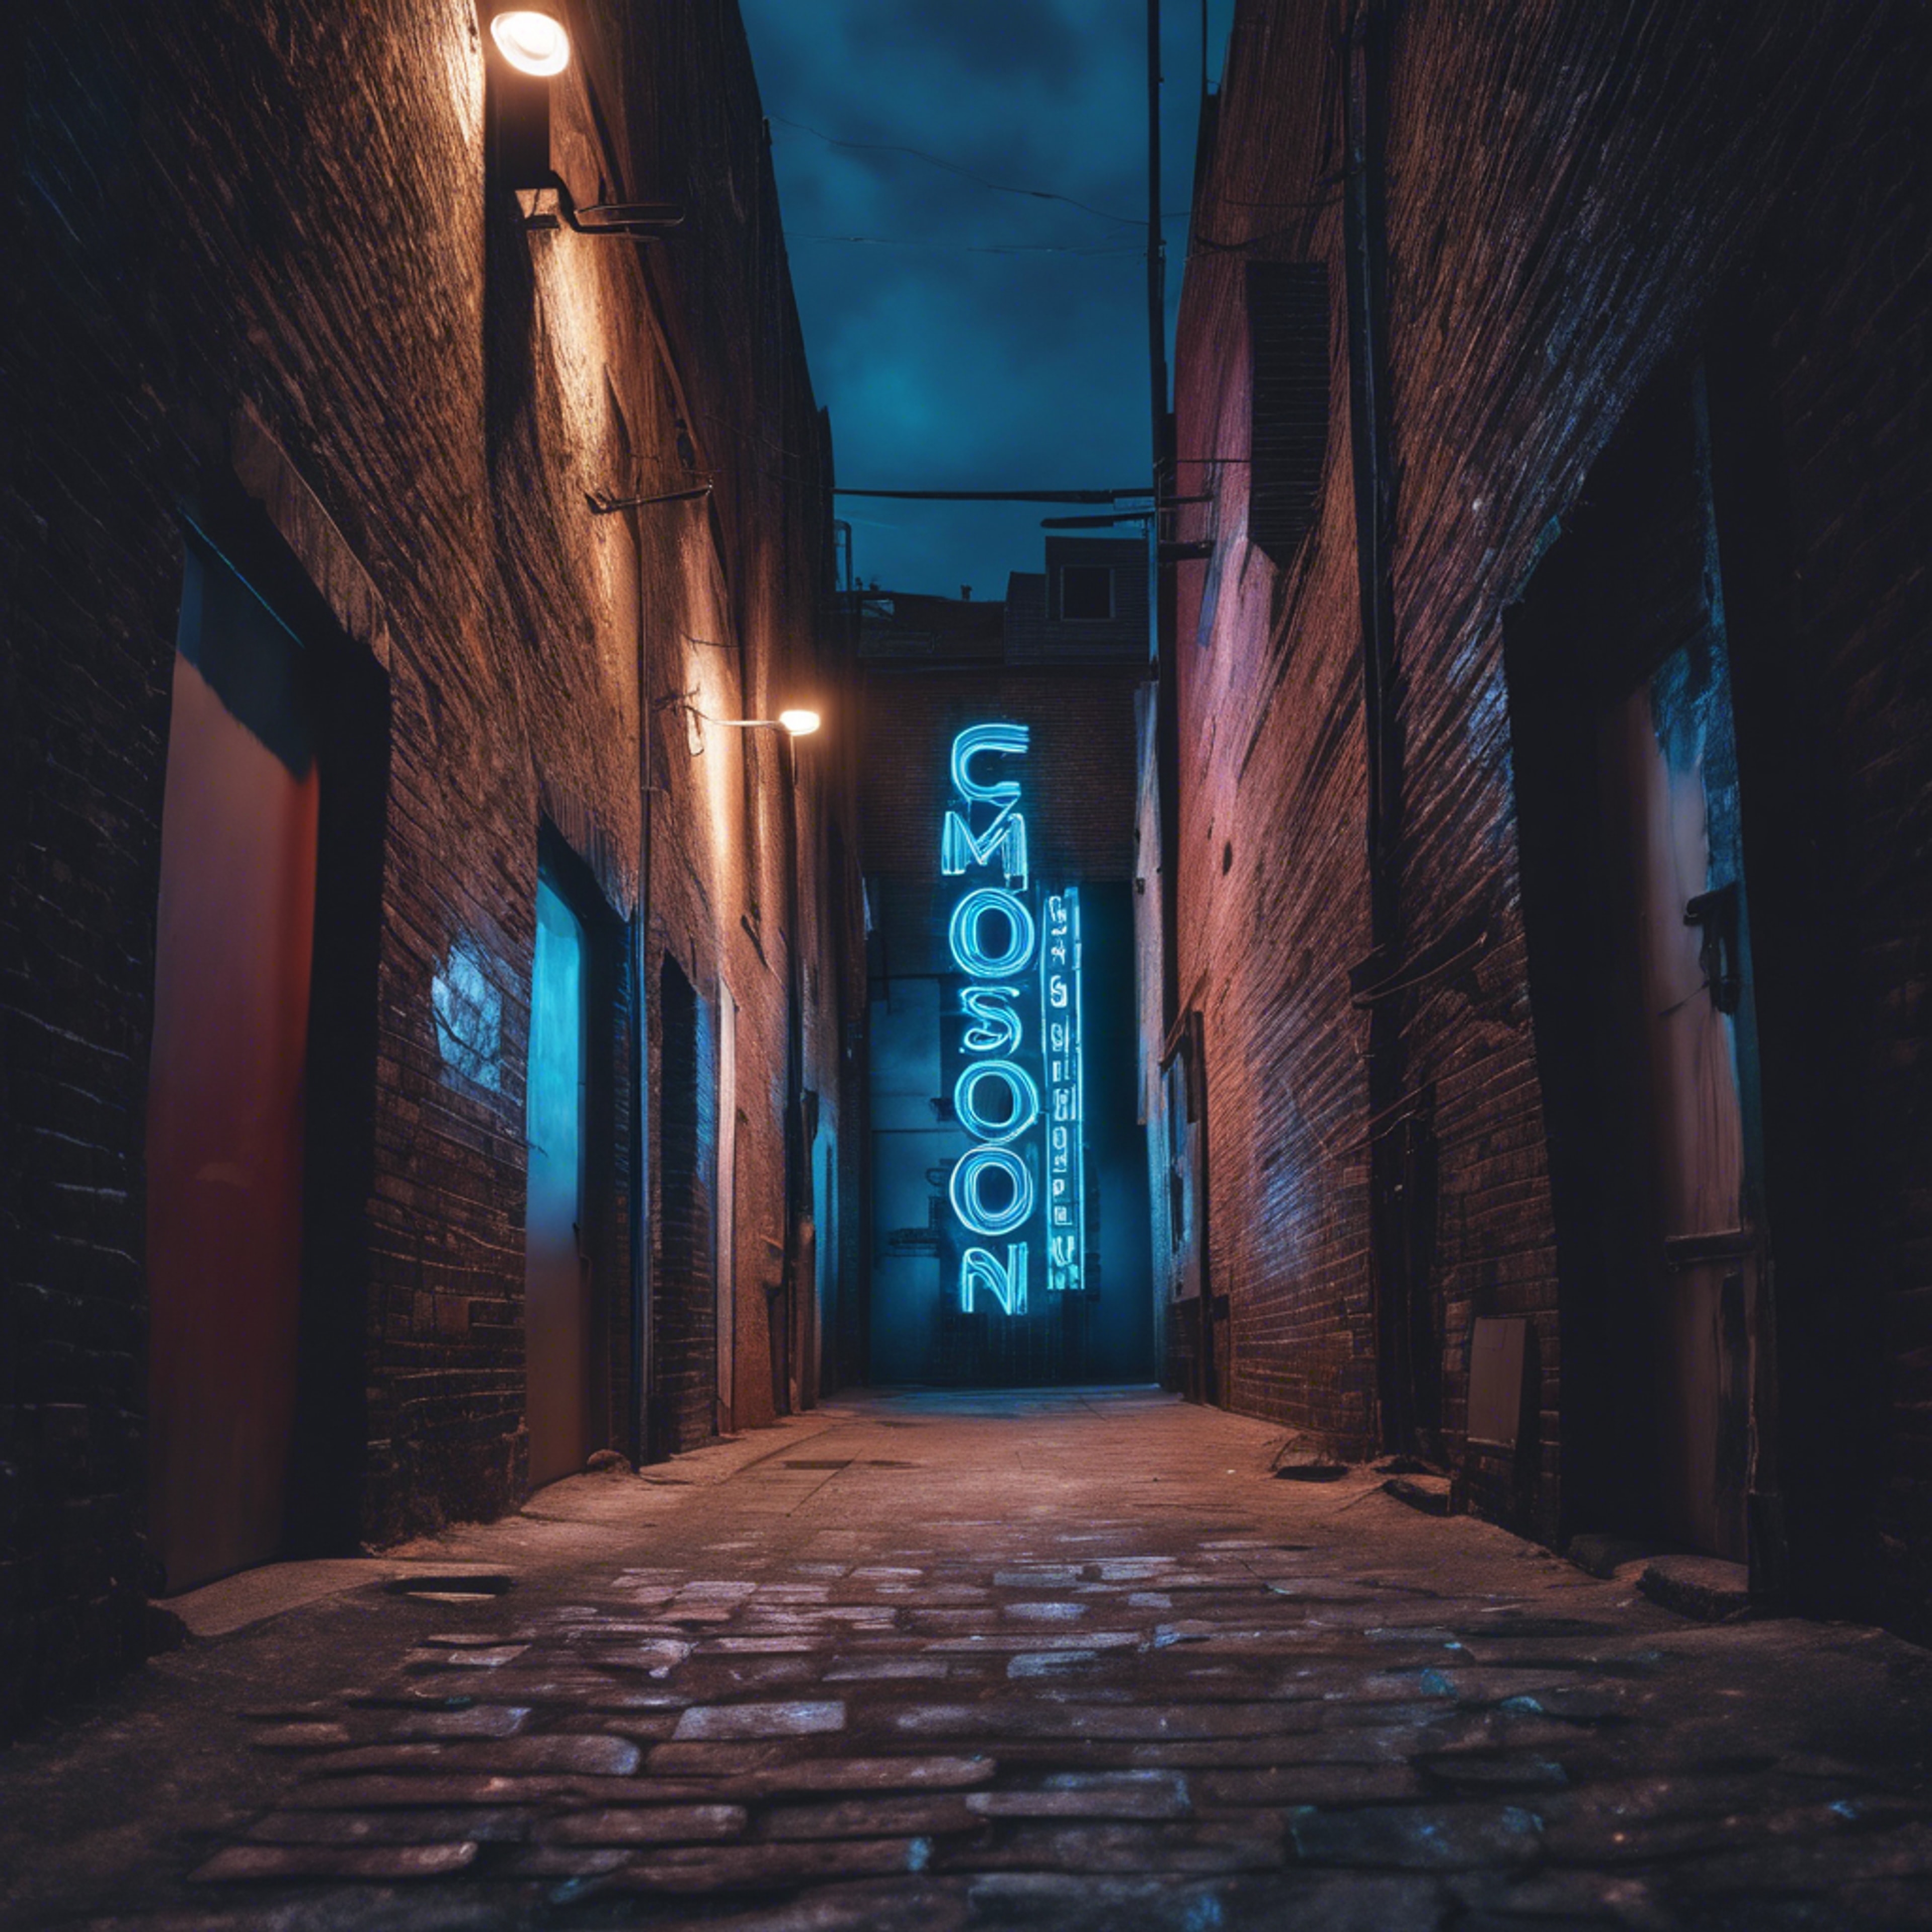 A cool blue neon sign glowing in a dark alley Tapetai[2a7b25783bff4a339087]